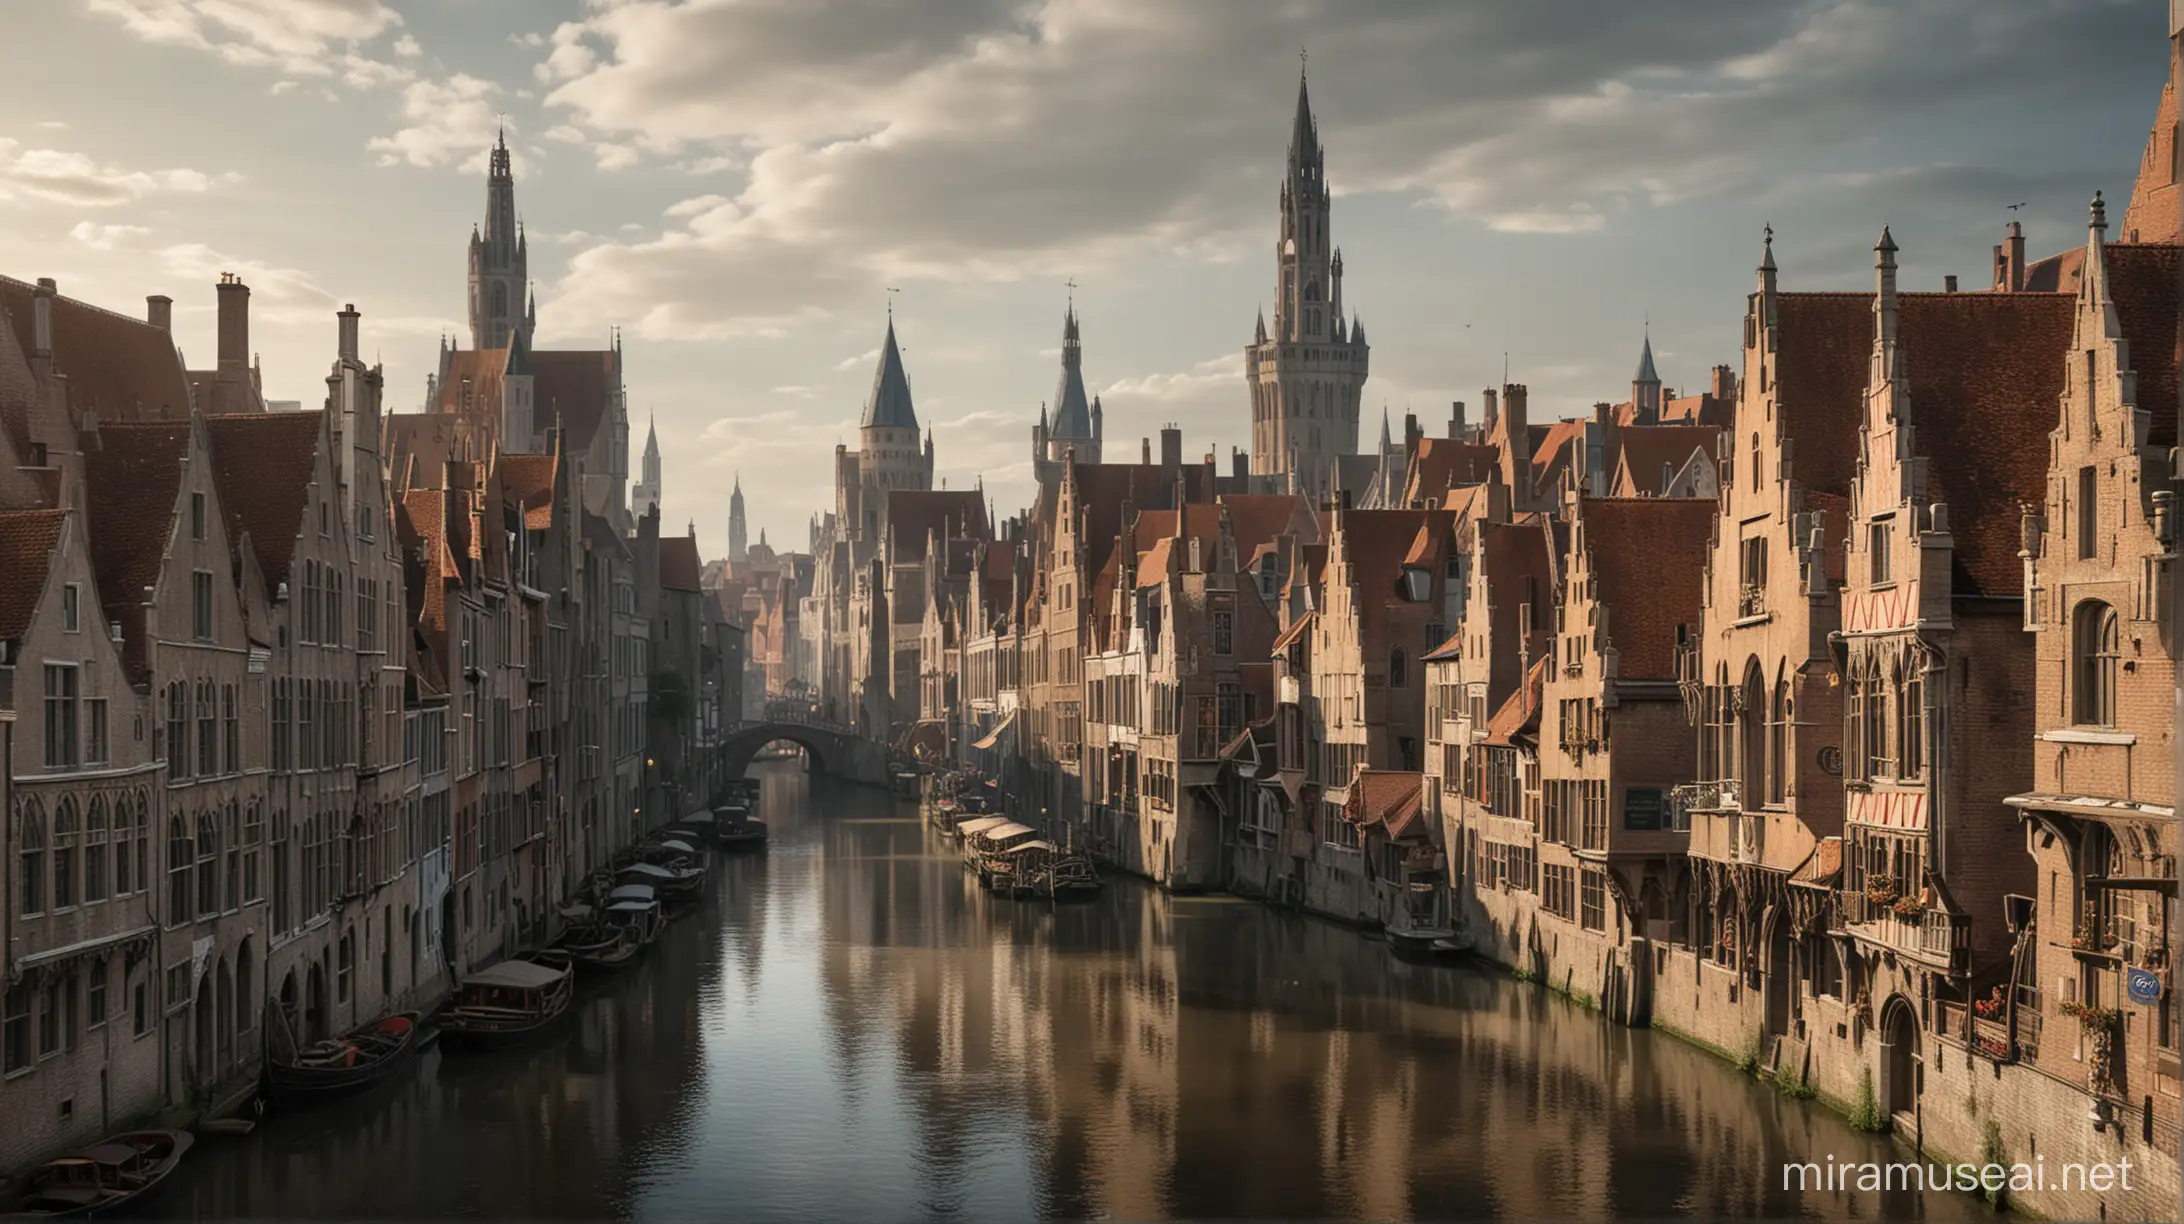 can you generate a picture showing city of Bruges in middle age ? Can you make it really appearing as an image of the past (14th century)
